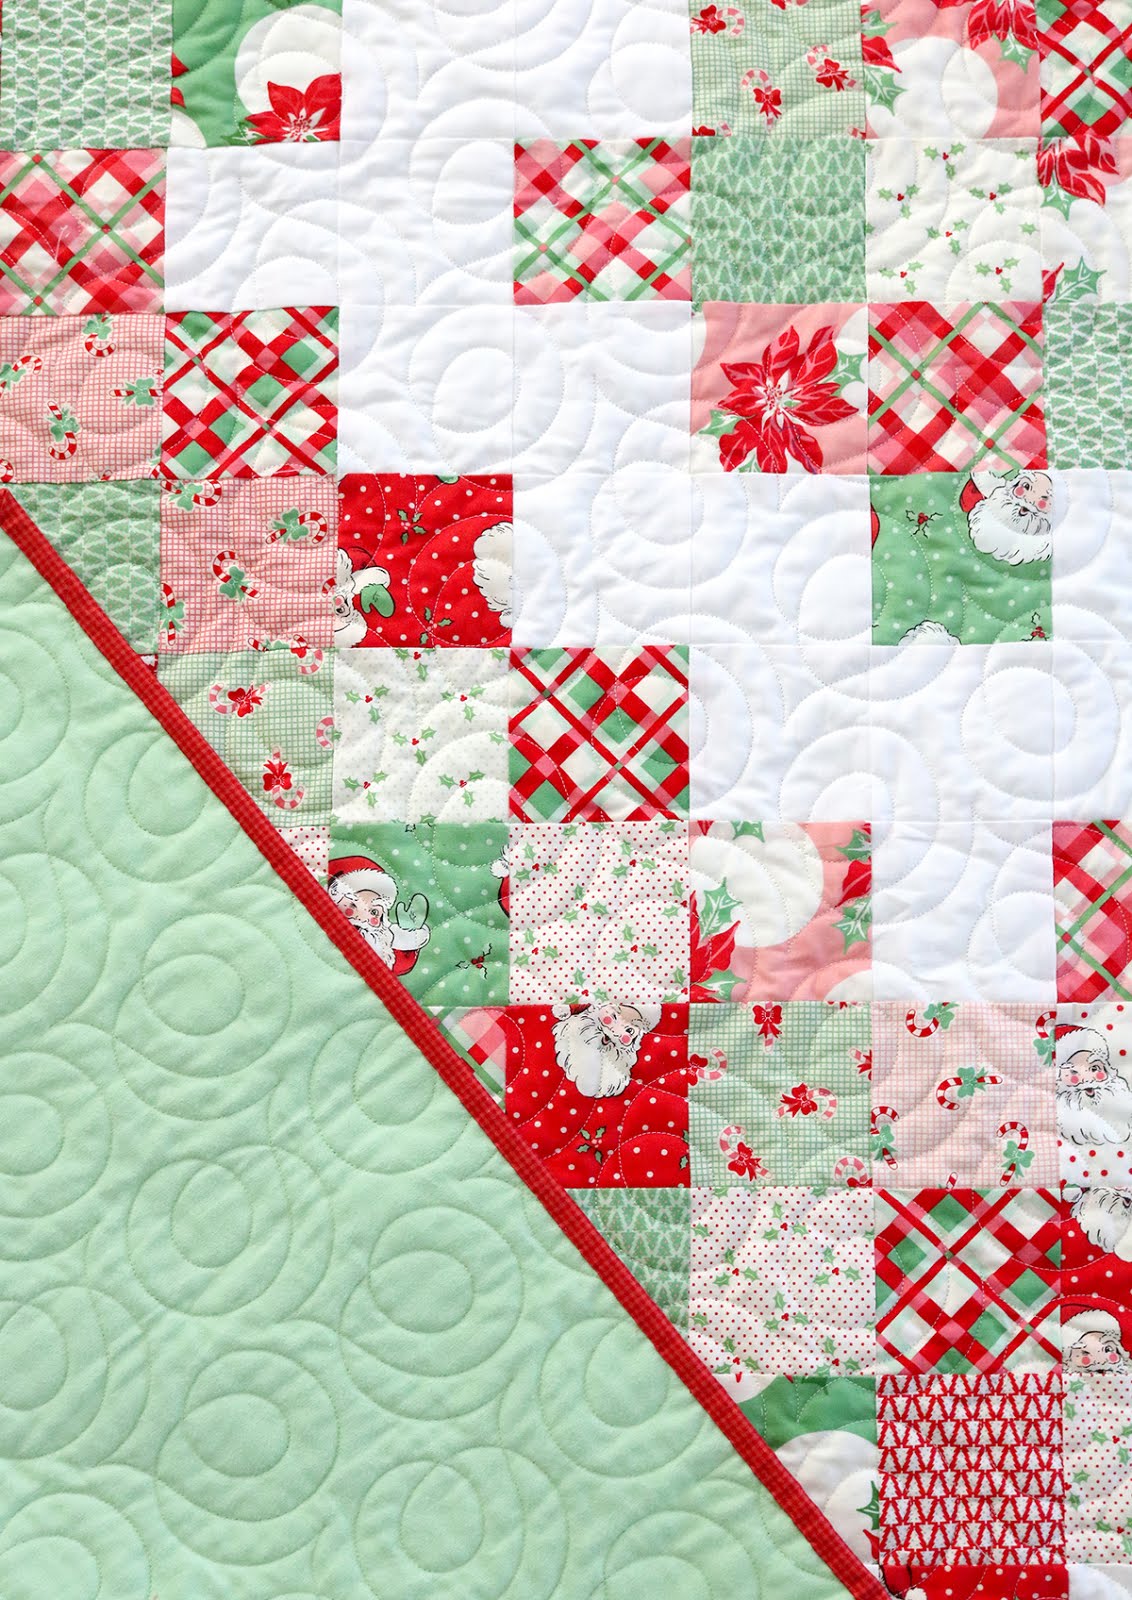 How does patchwork become popular?